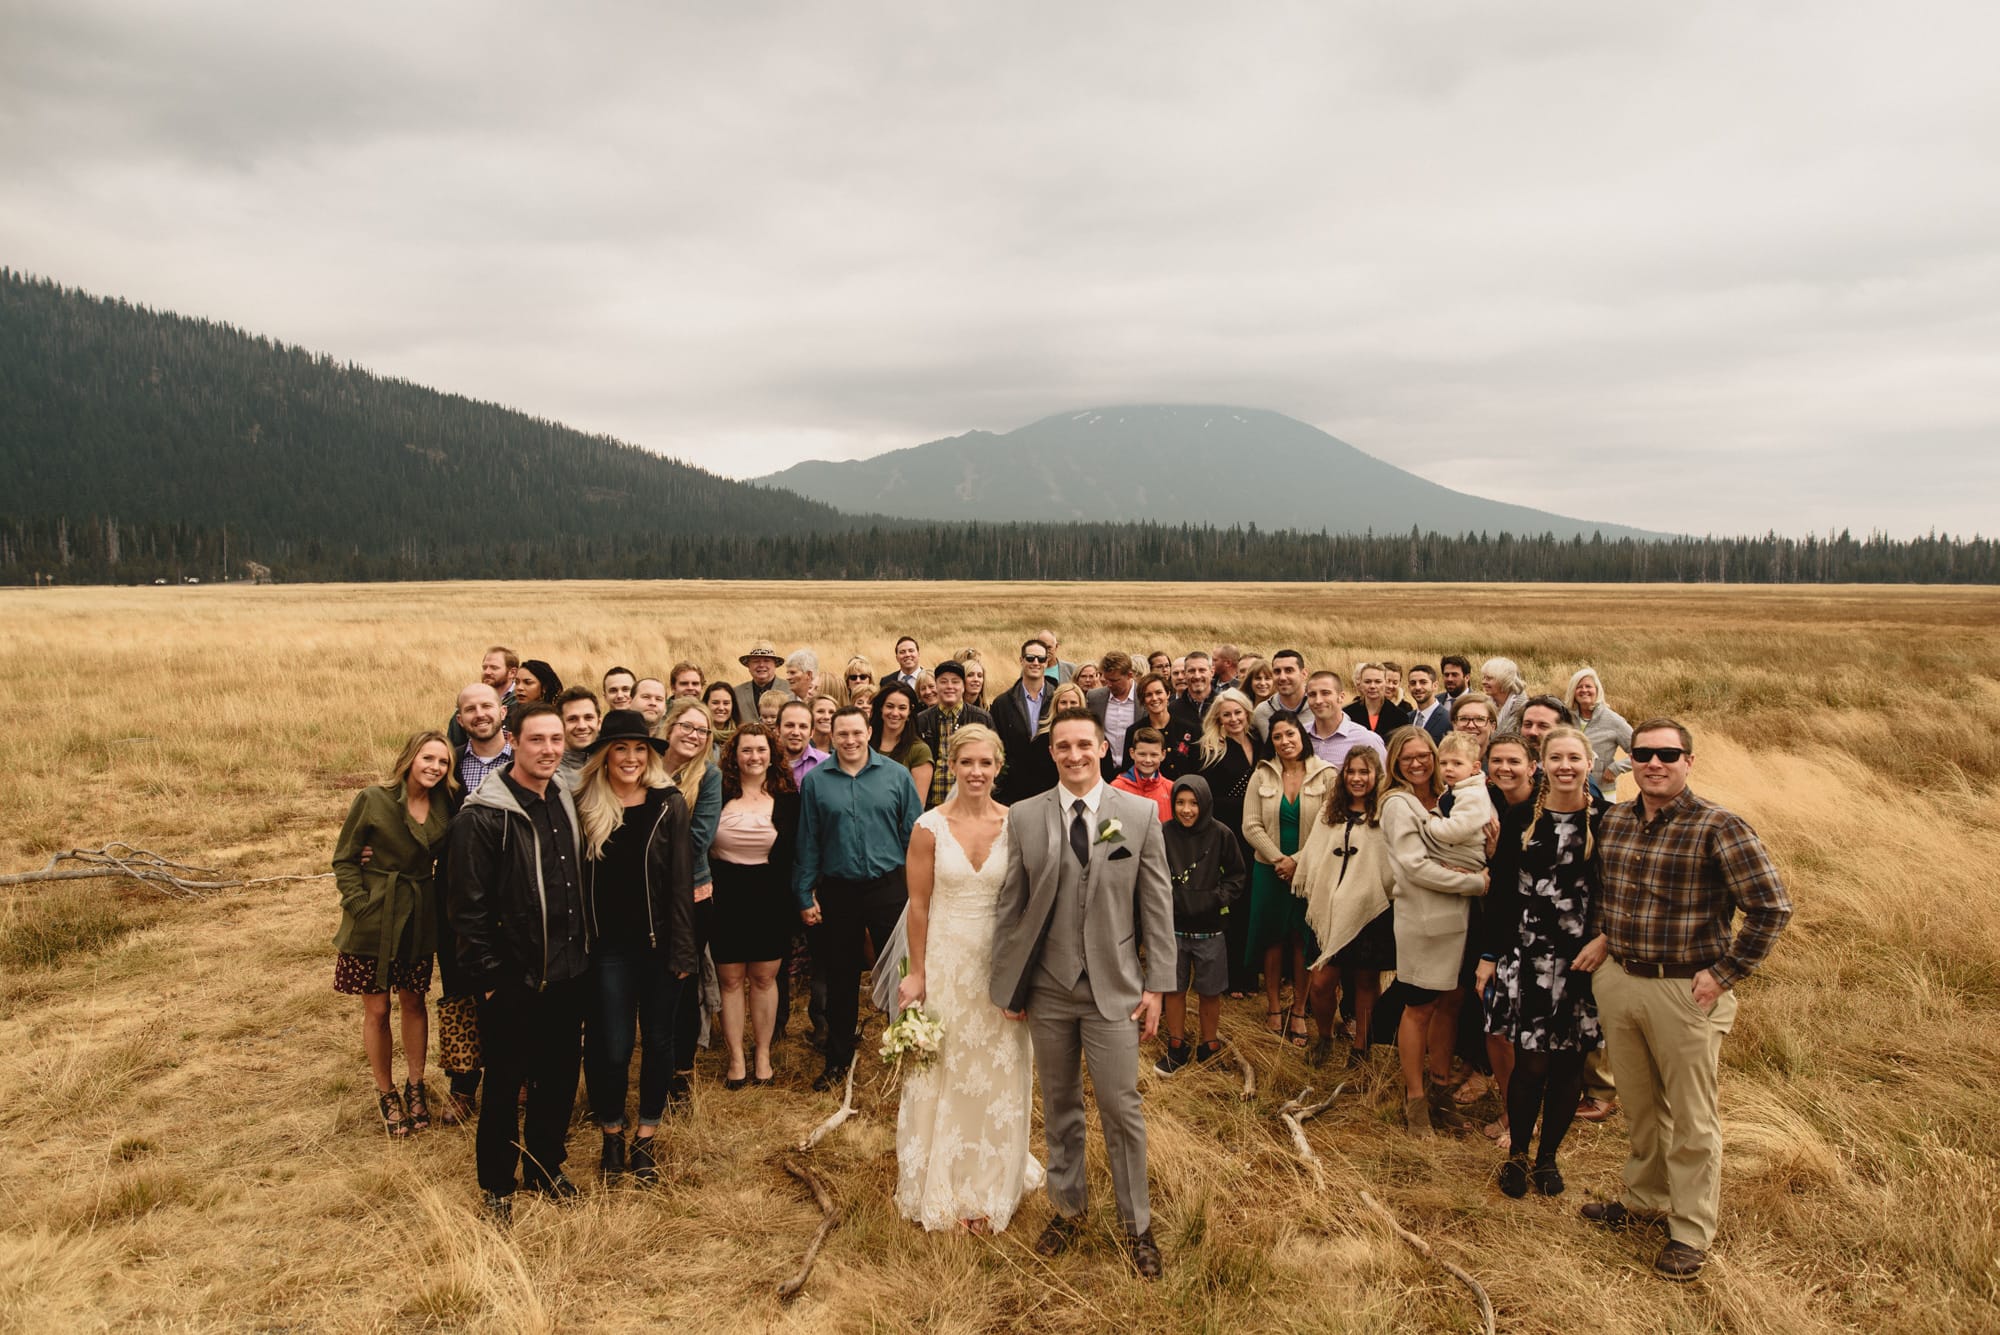 Bend Oregon Wedding Photographers Sparks Lake 1027 On XloveCam Ukrainian intercourse speak, the very first thing really worth doing try finalizing right up since the an associate